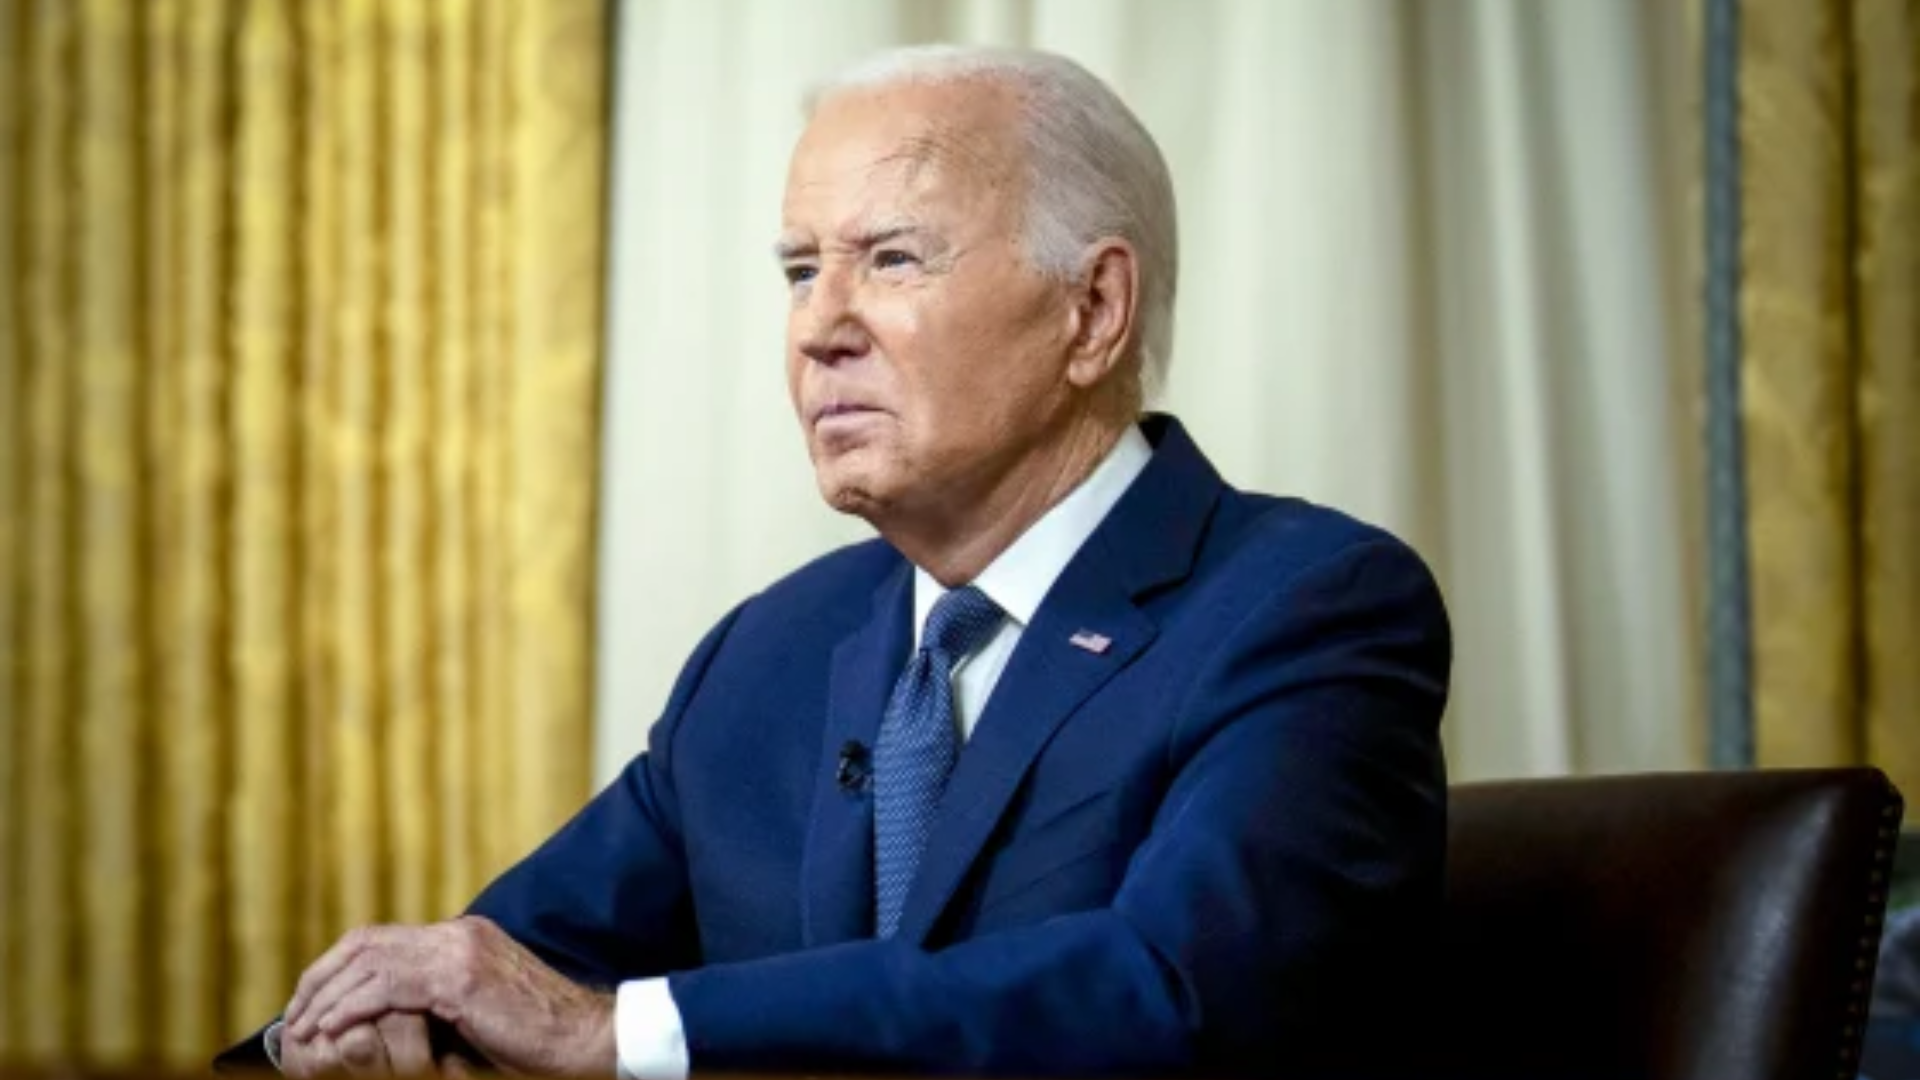 President Biden to Address Nation from Oval Office on Decision to End Re-Election Campaign